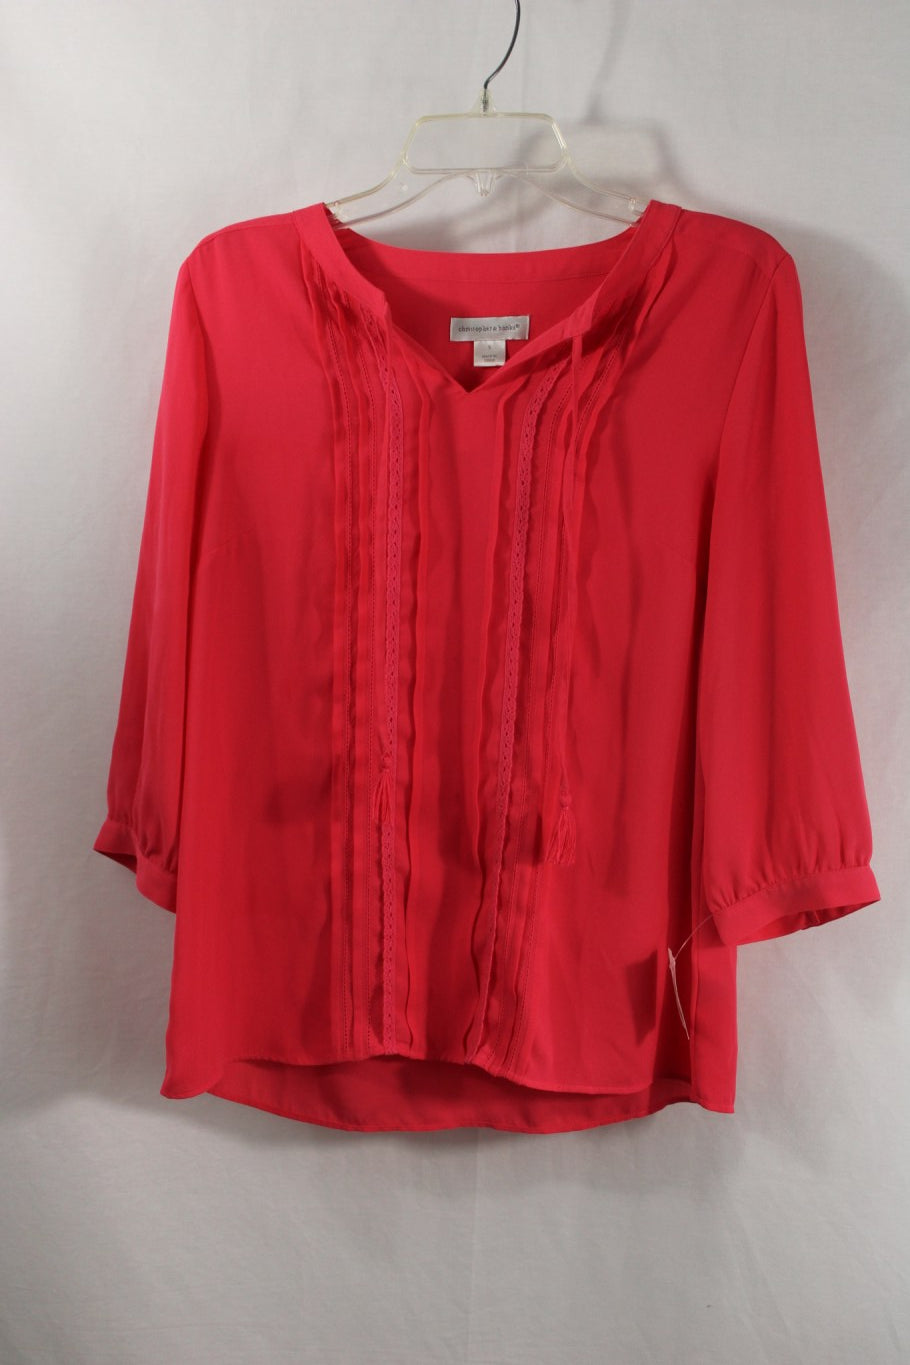 Christopher & Banks Pink Blouse | S